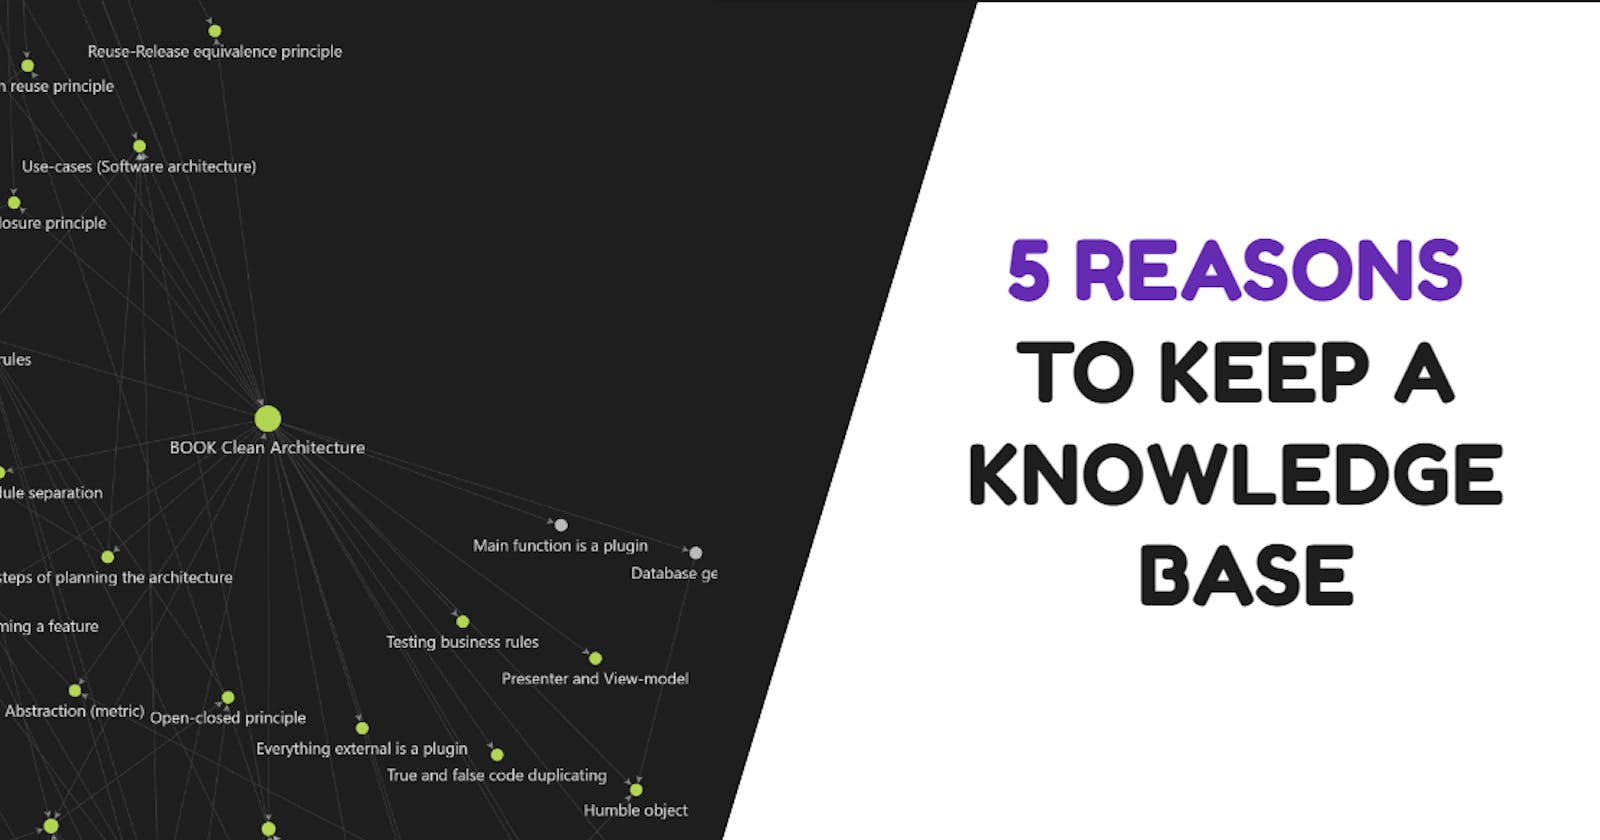 5 reasons to Keep a Personal Knowledge Base